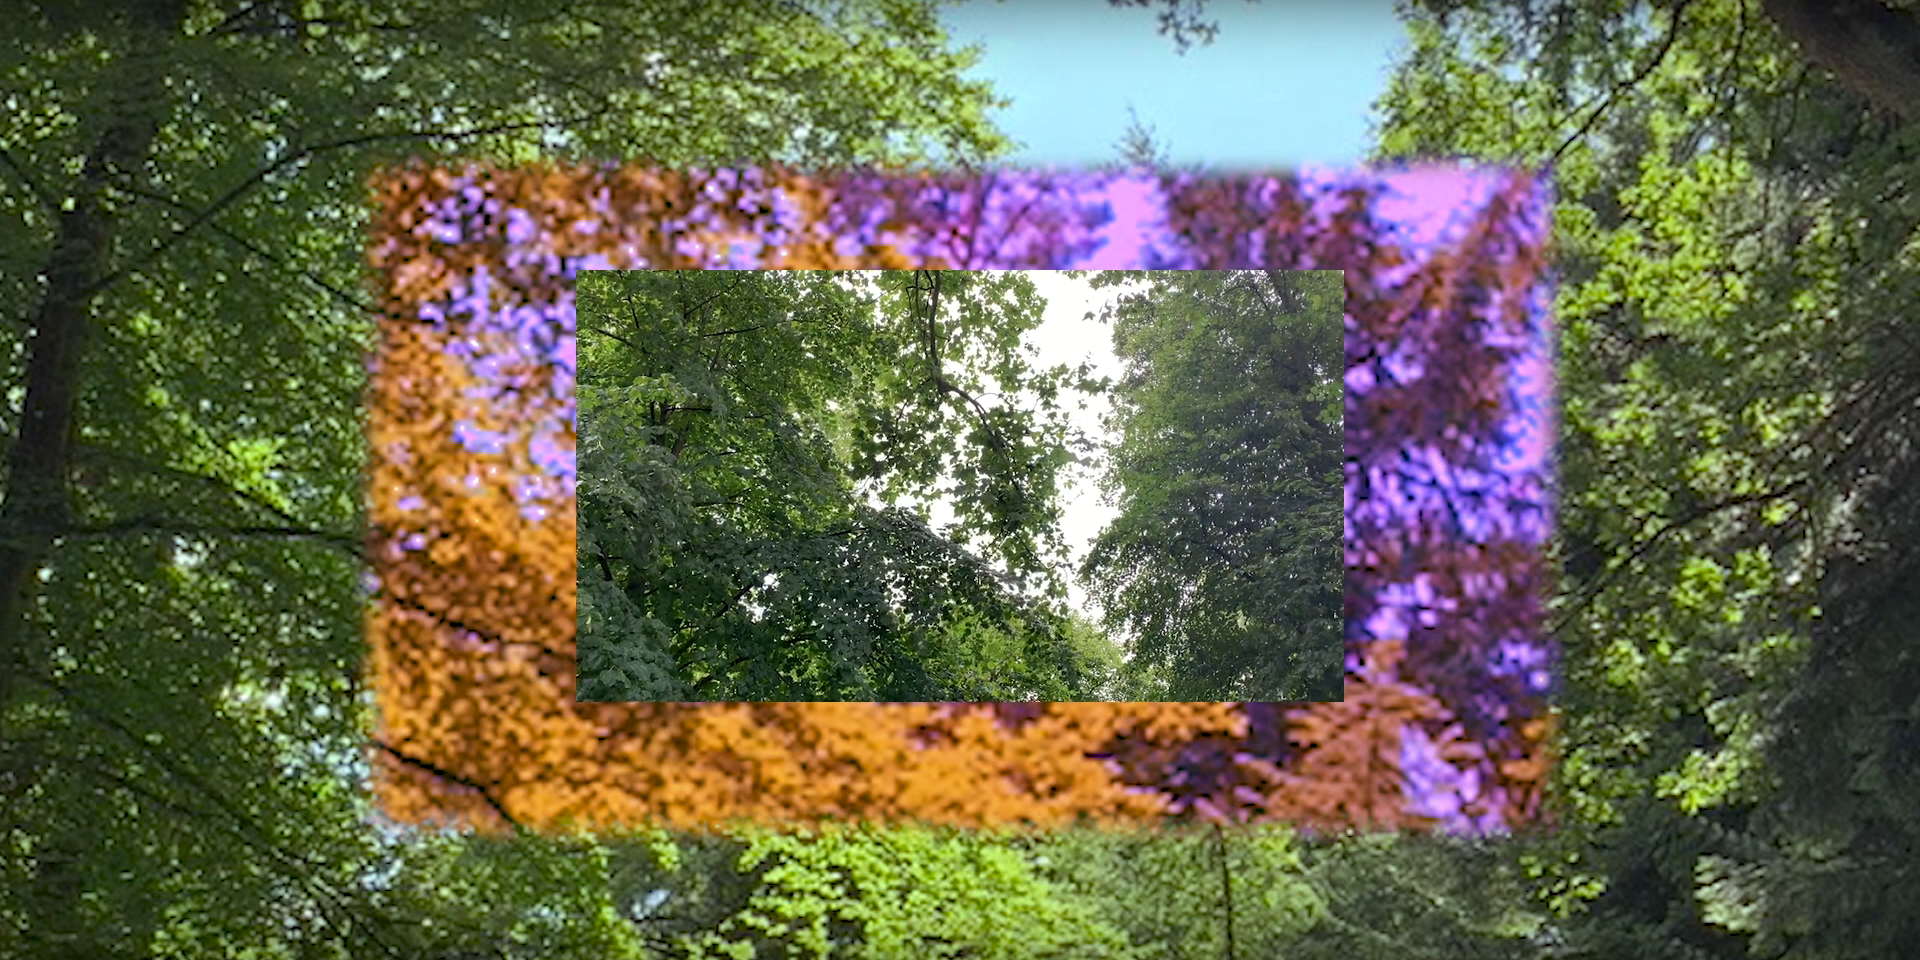 Between Worlds: INSIDE-OUTSIDE. The video projected during the installation at the MA show in September 2021.